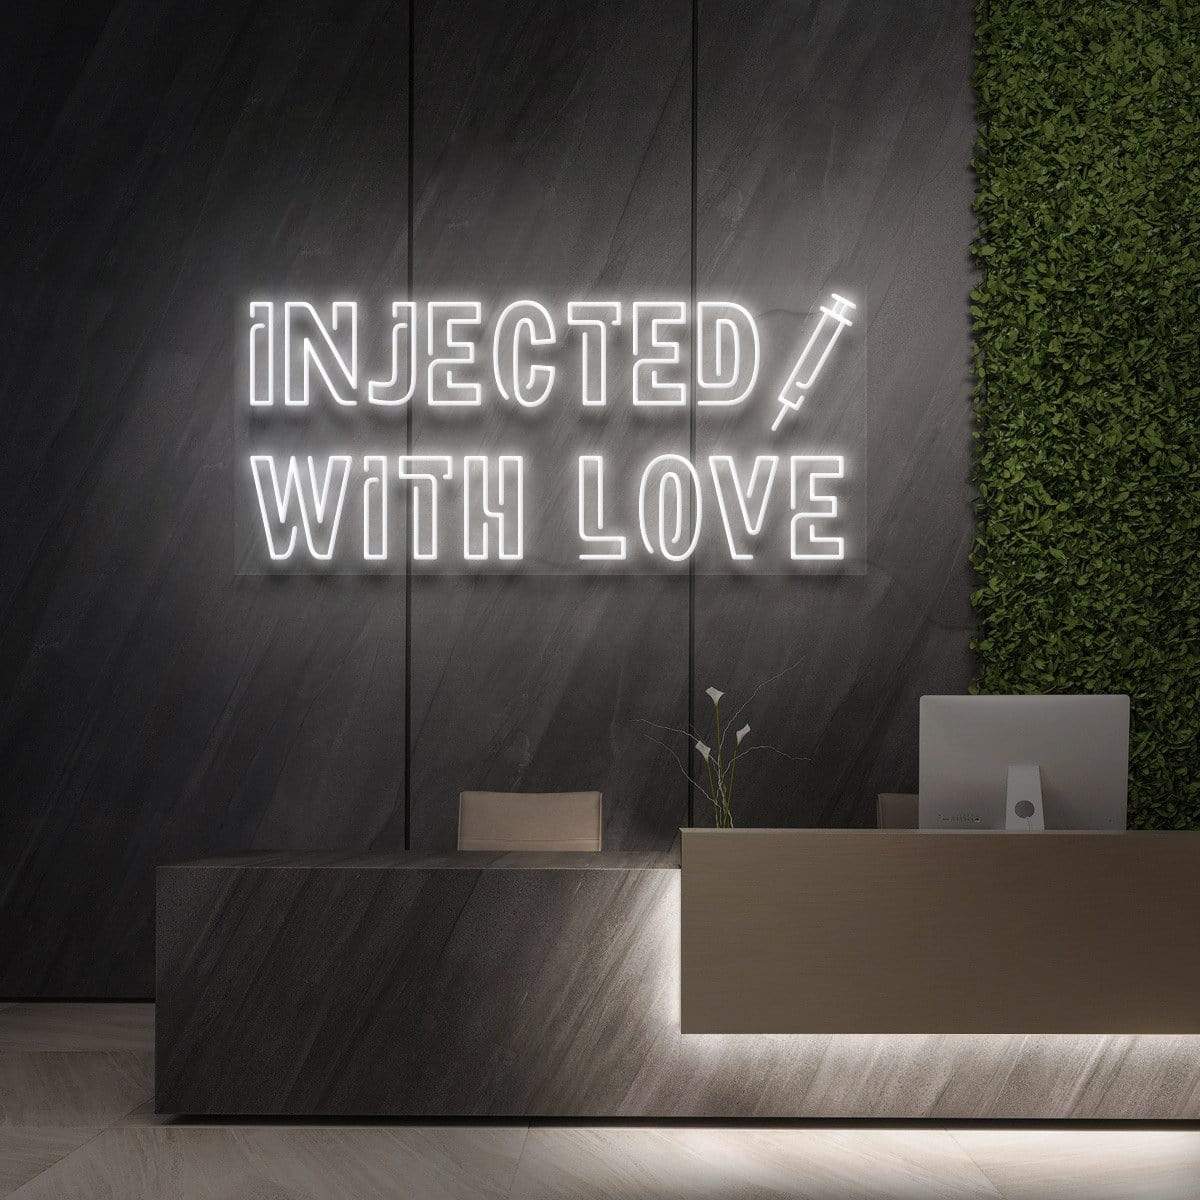 "Injected With Love" Neon Sign for Beauty & Cosmetic Studios